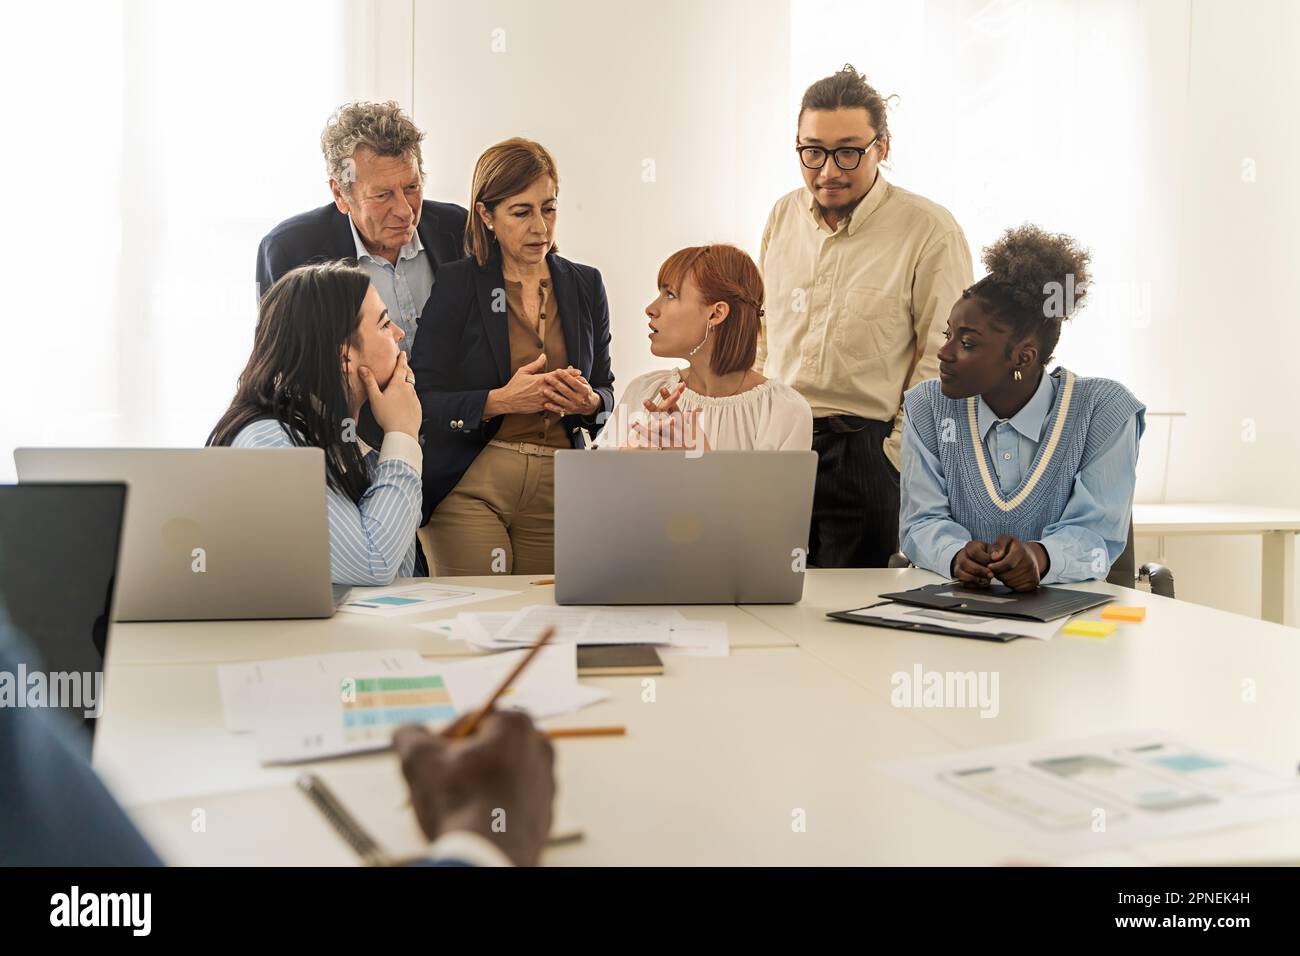 A multiethnic group of colleagues, including Caucasians, Americans, Chinese, and Africans, attentively discussing a project in front of a laptop, with Stock Photo